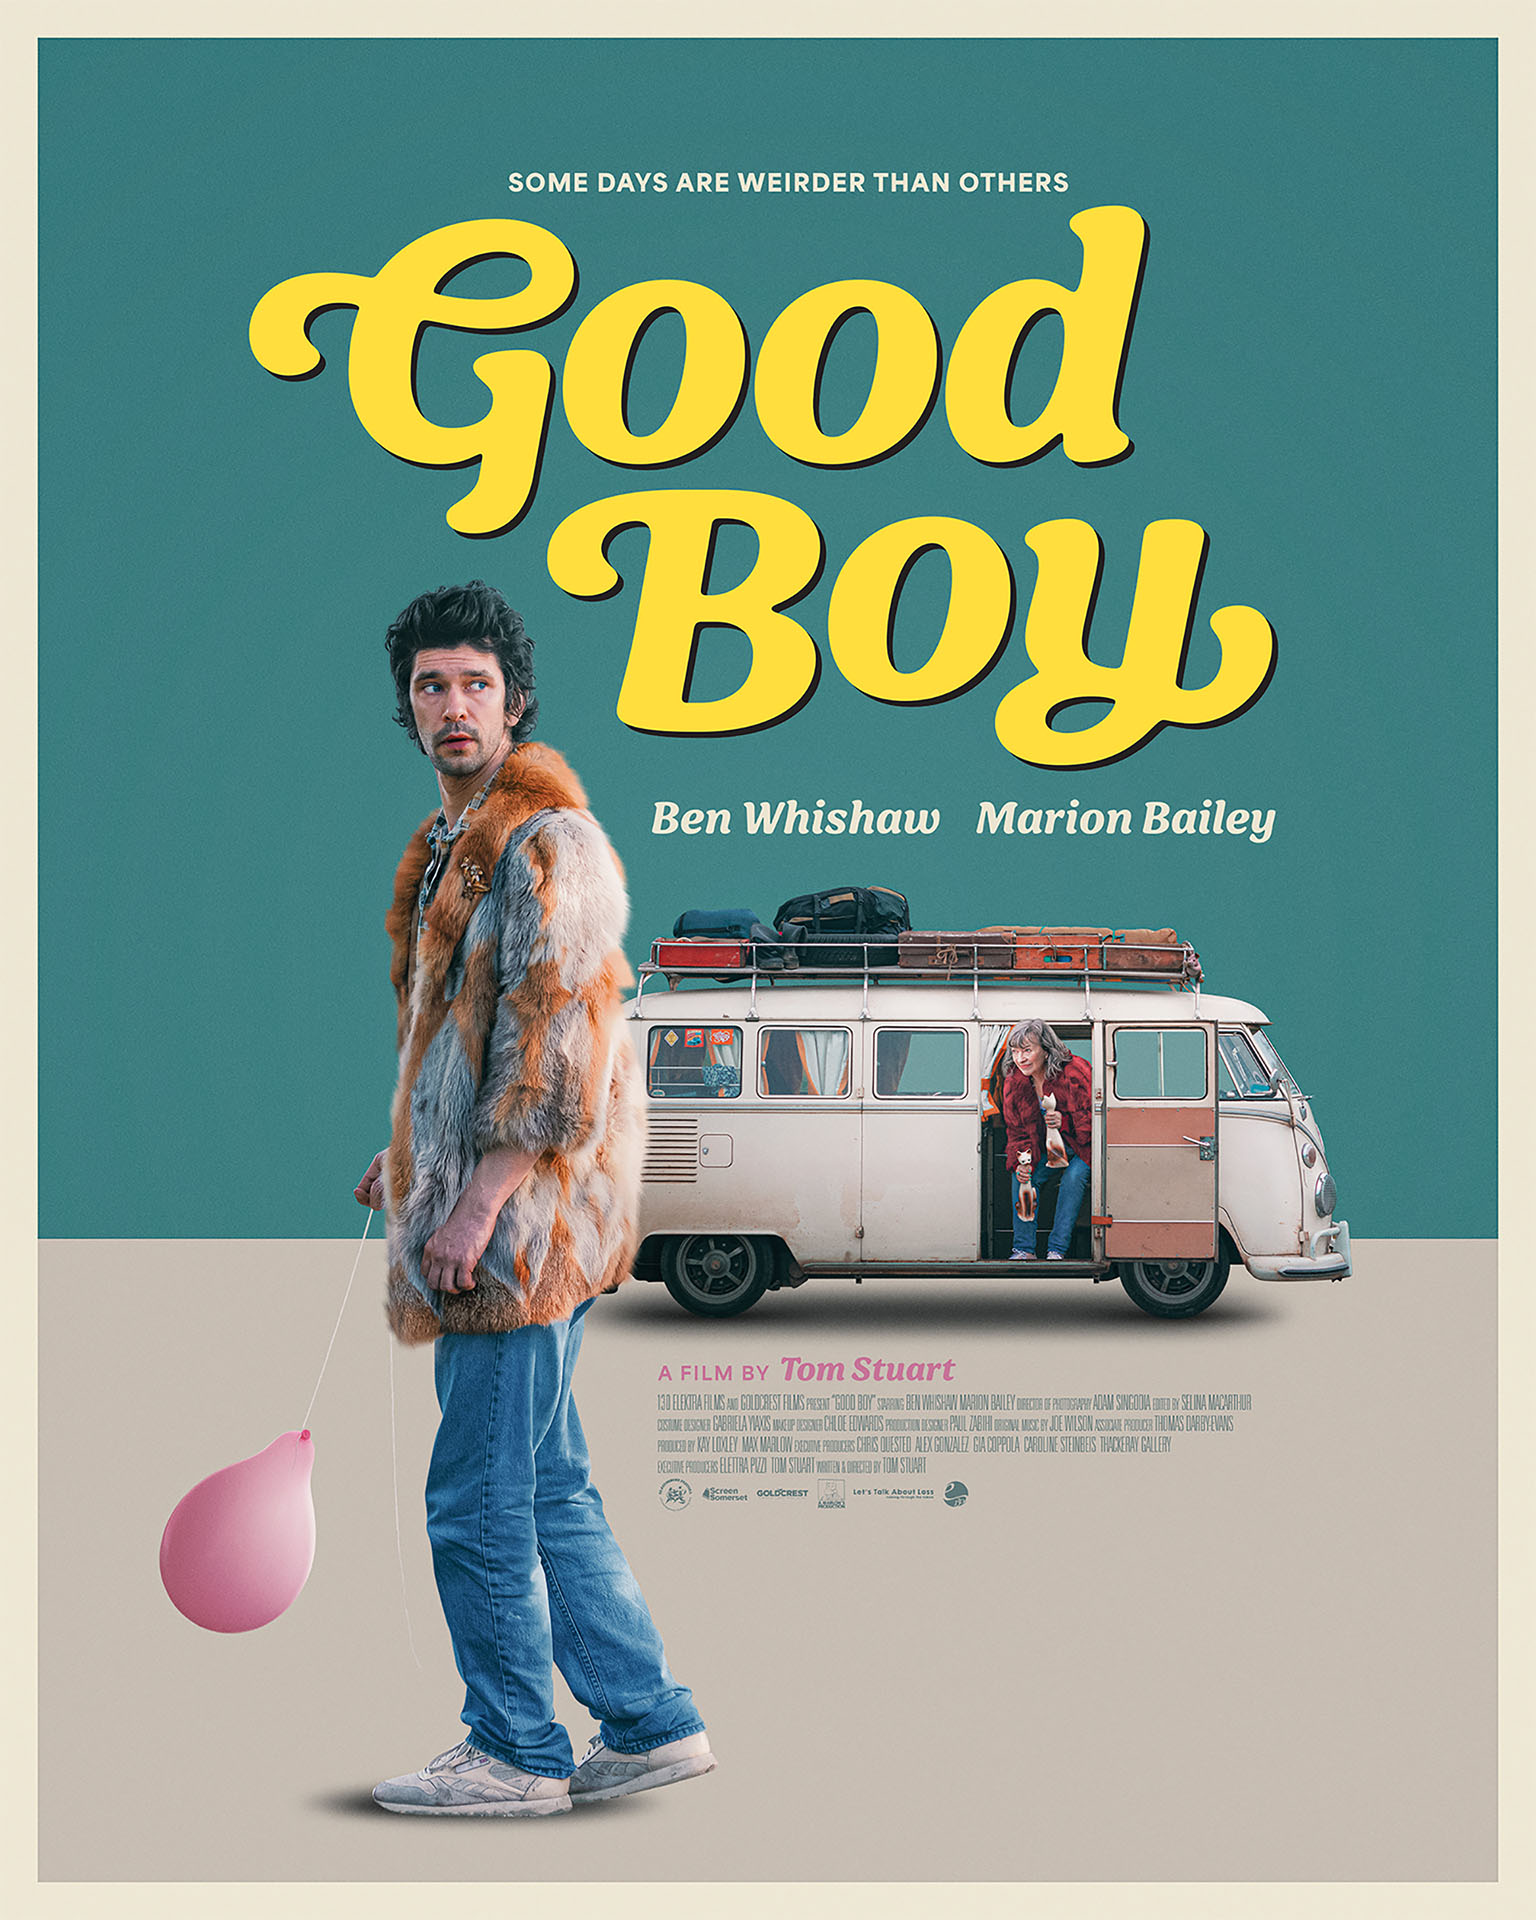 Poster for Good Boy starring Ben Whishaw and Marion Bailey